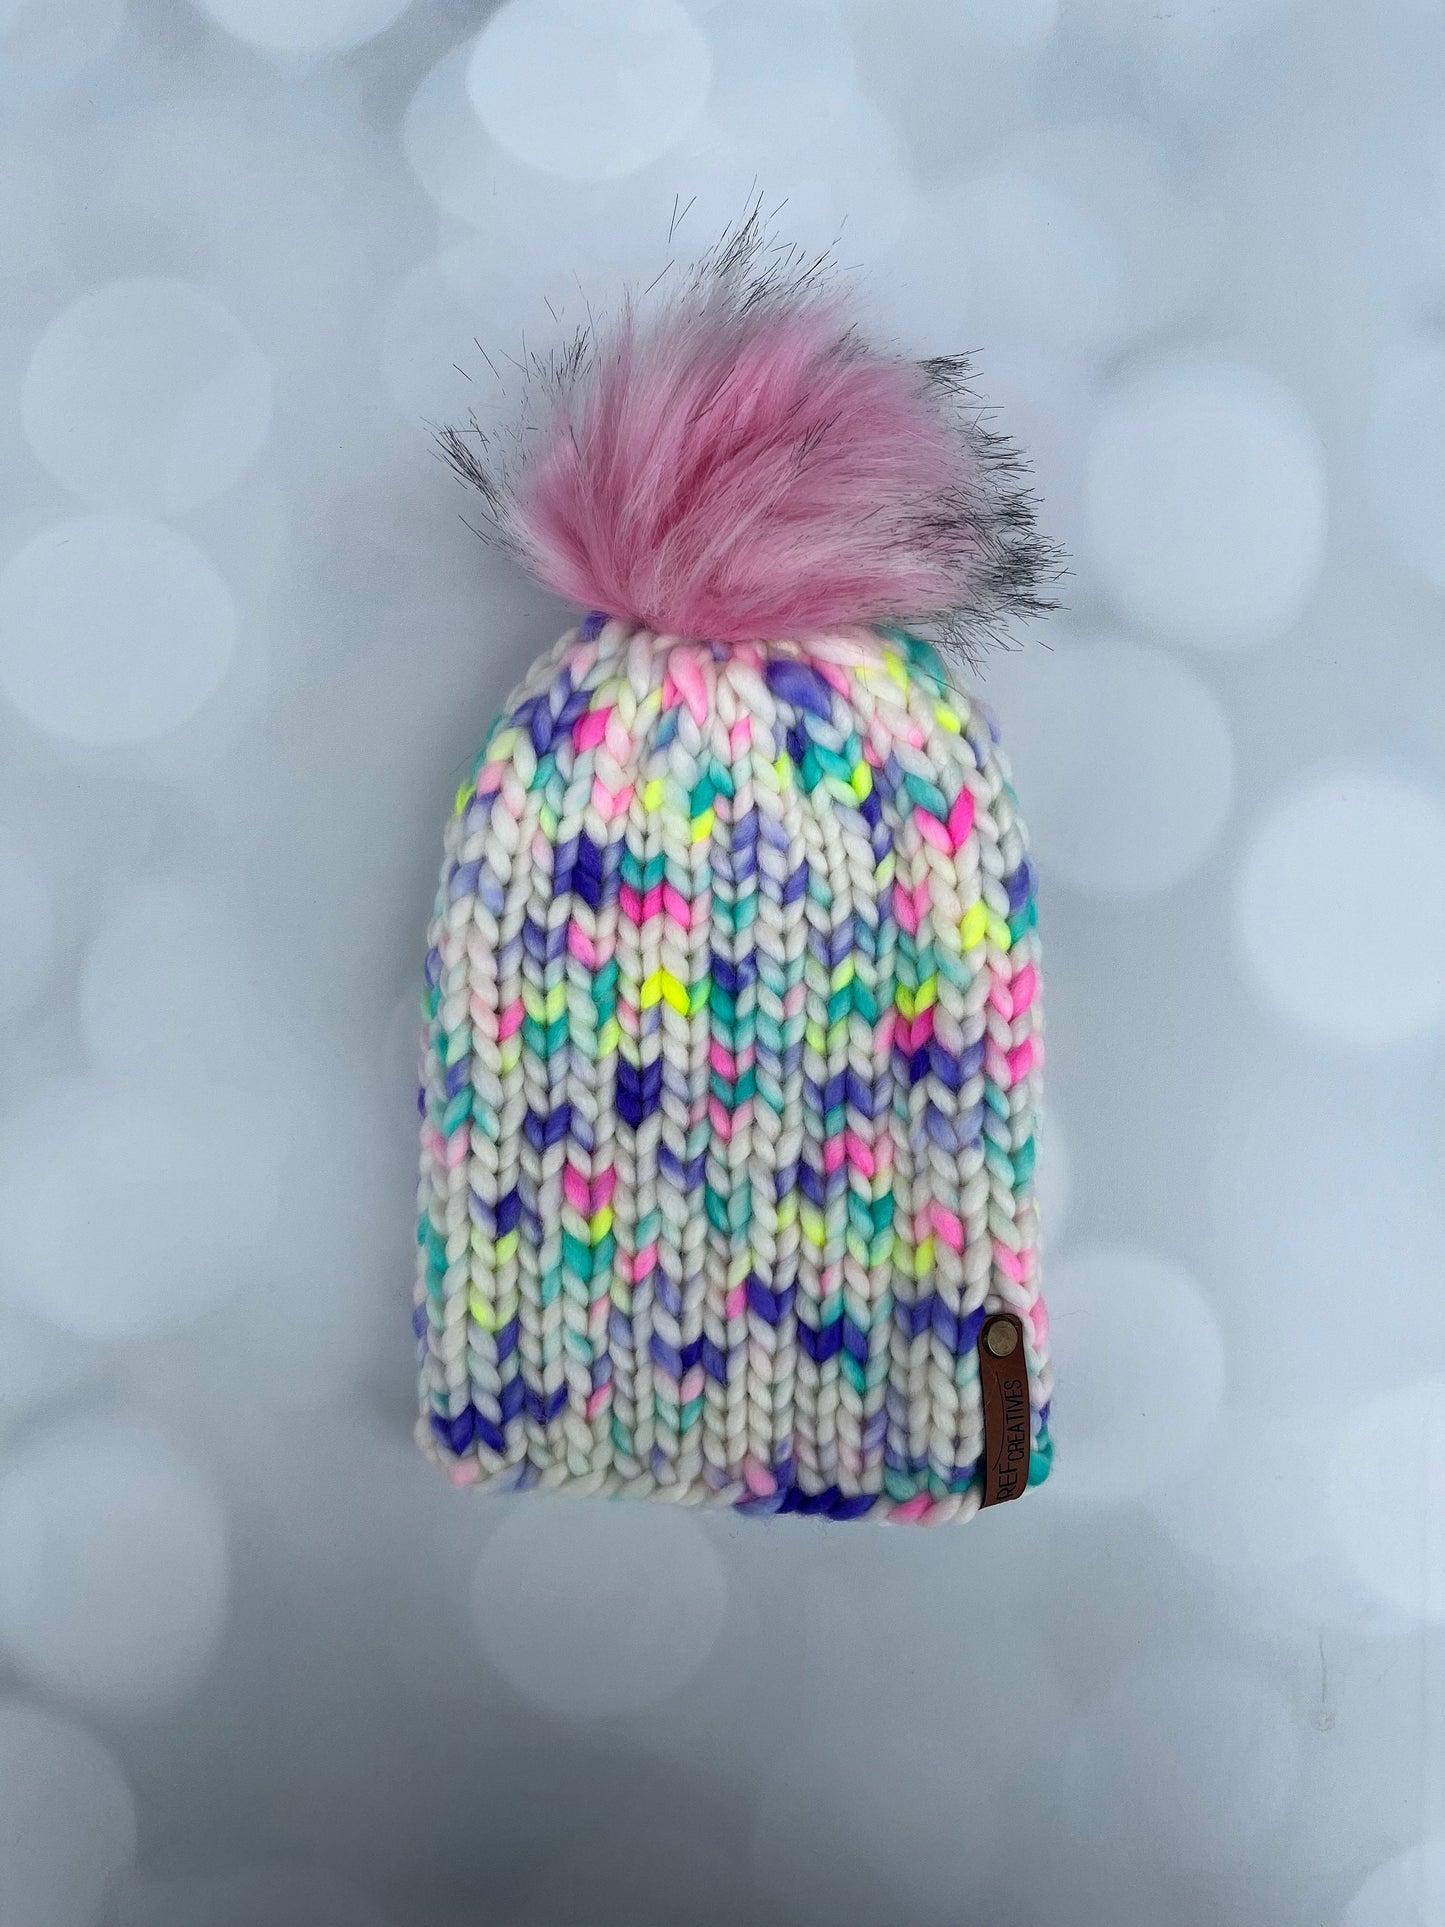 Pastel Neon Beanie Hand Knit Hat with Hand Dyed Yarn